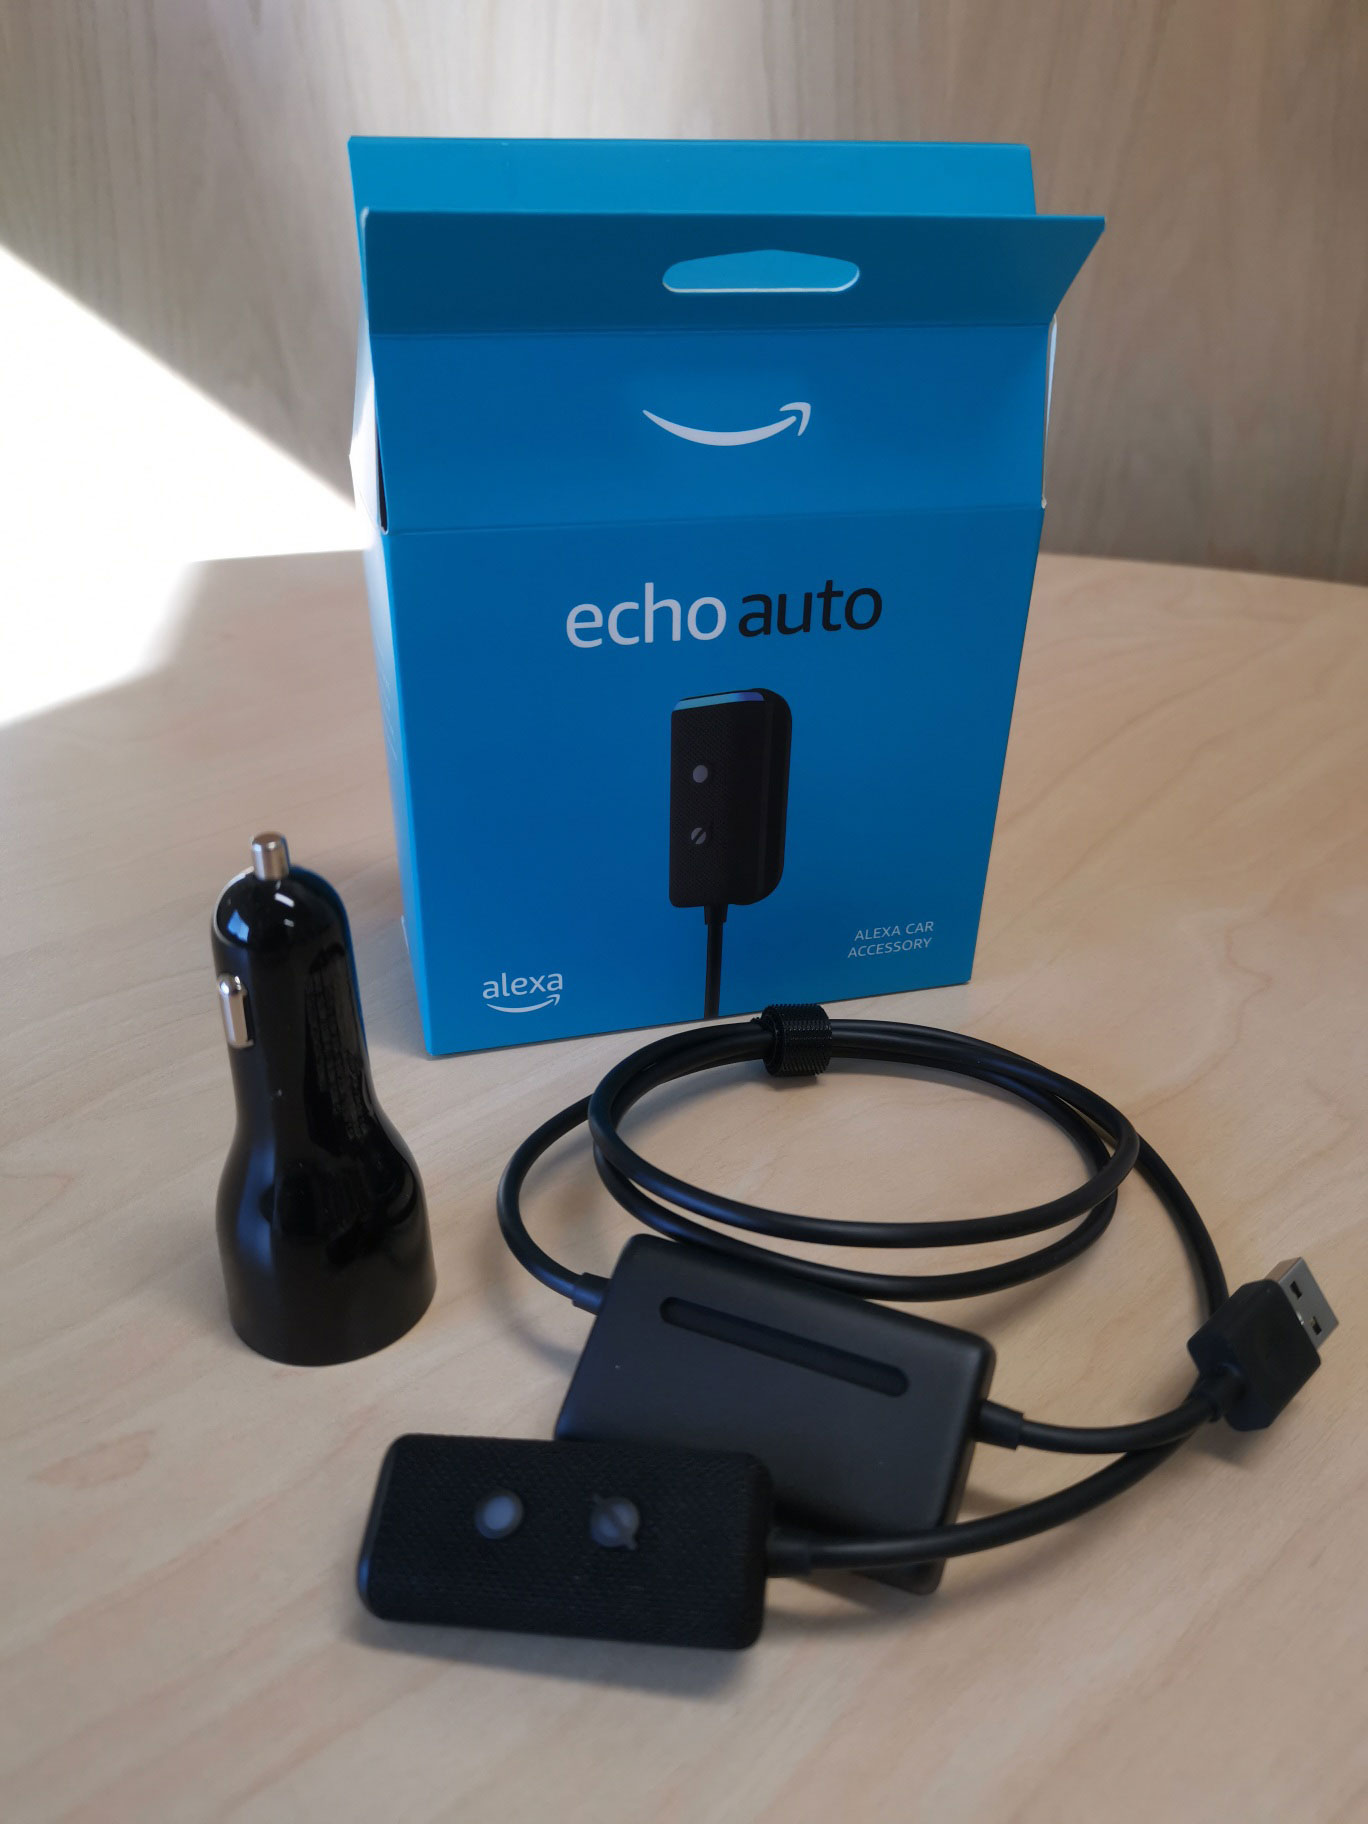 Echo Auto (2023) Review - STG Play